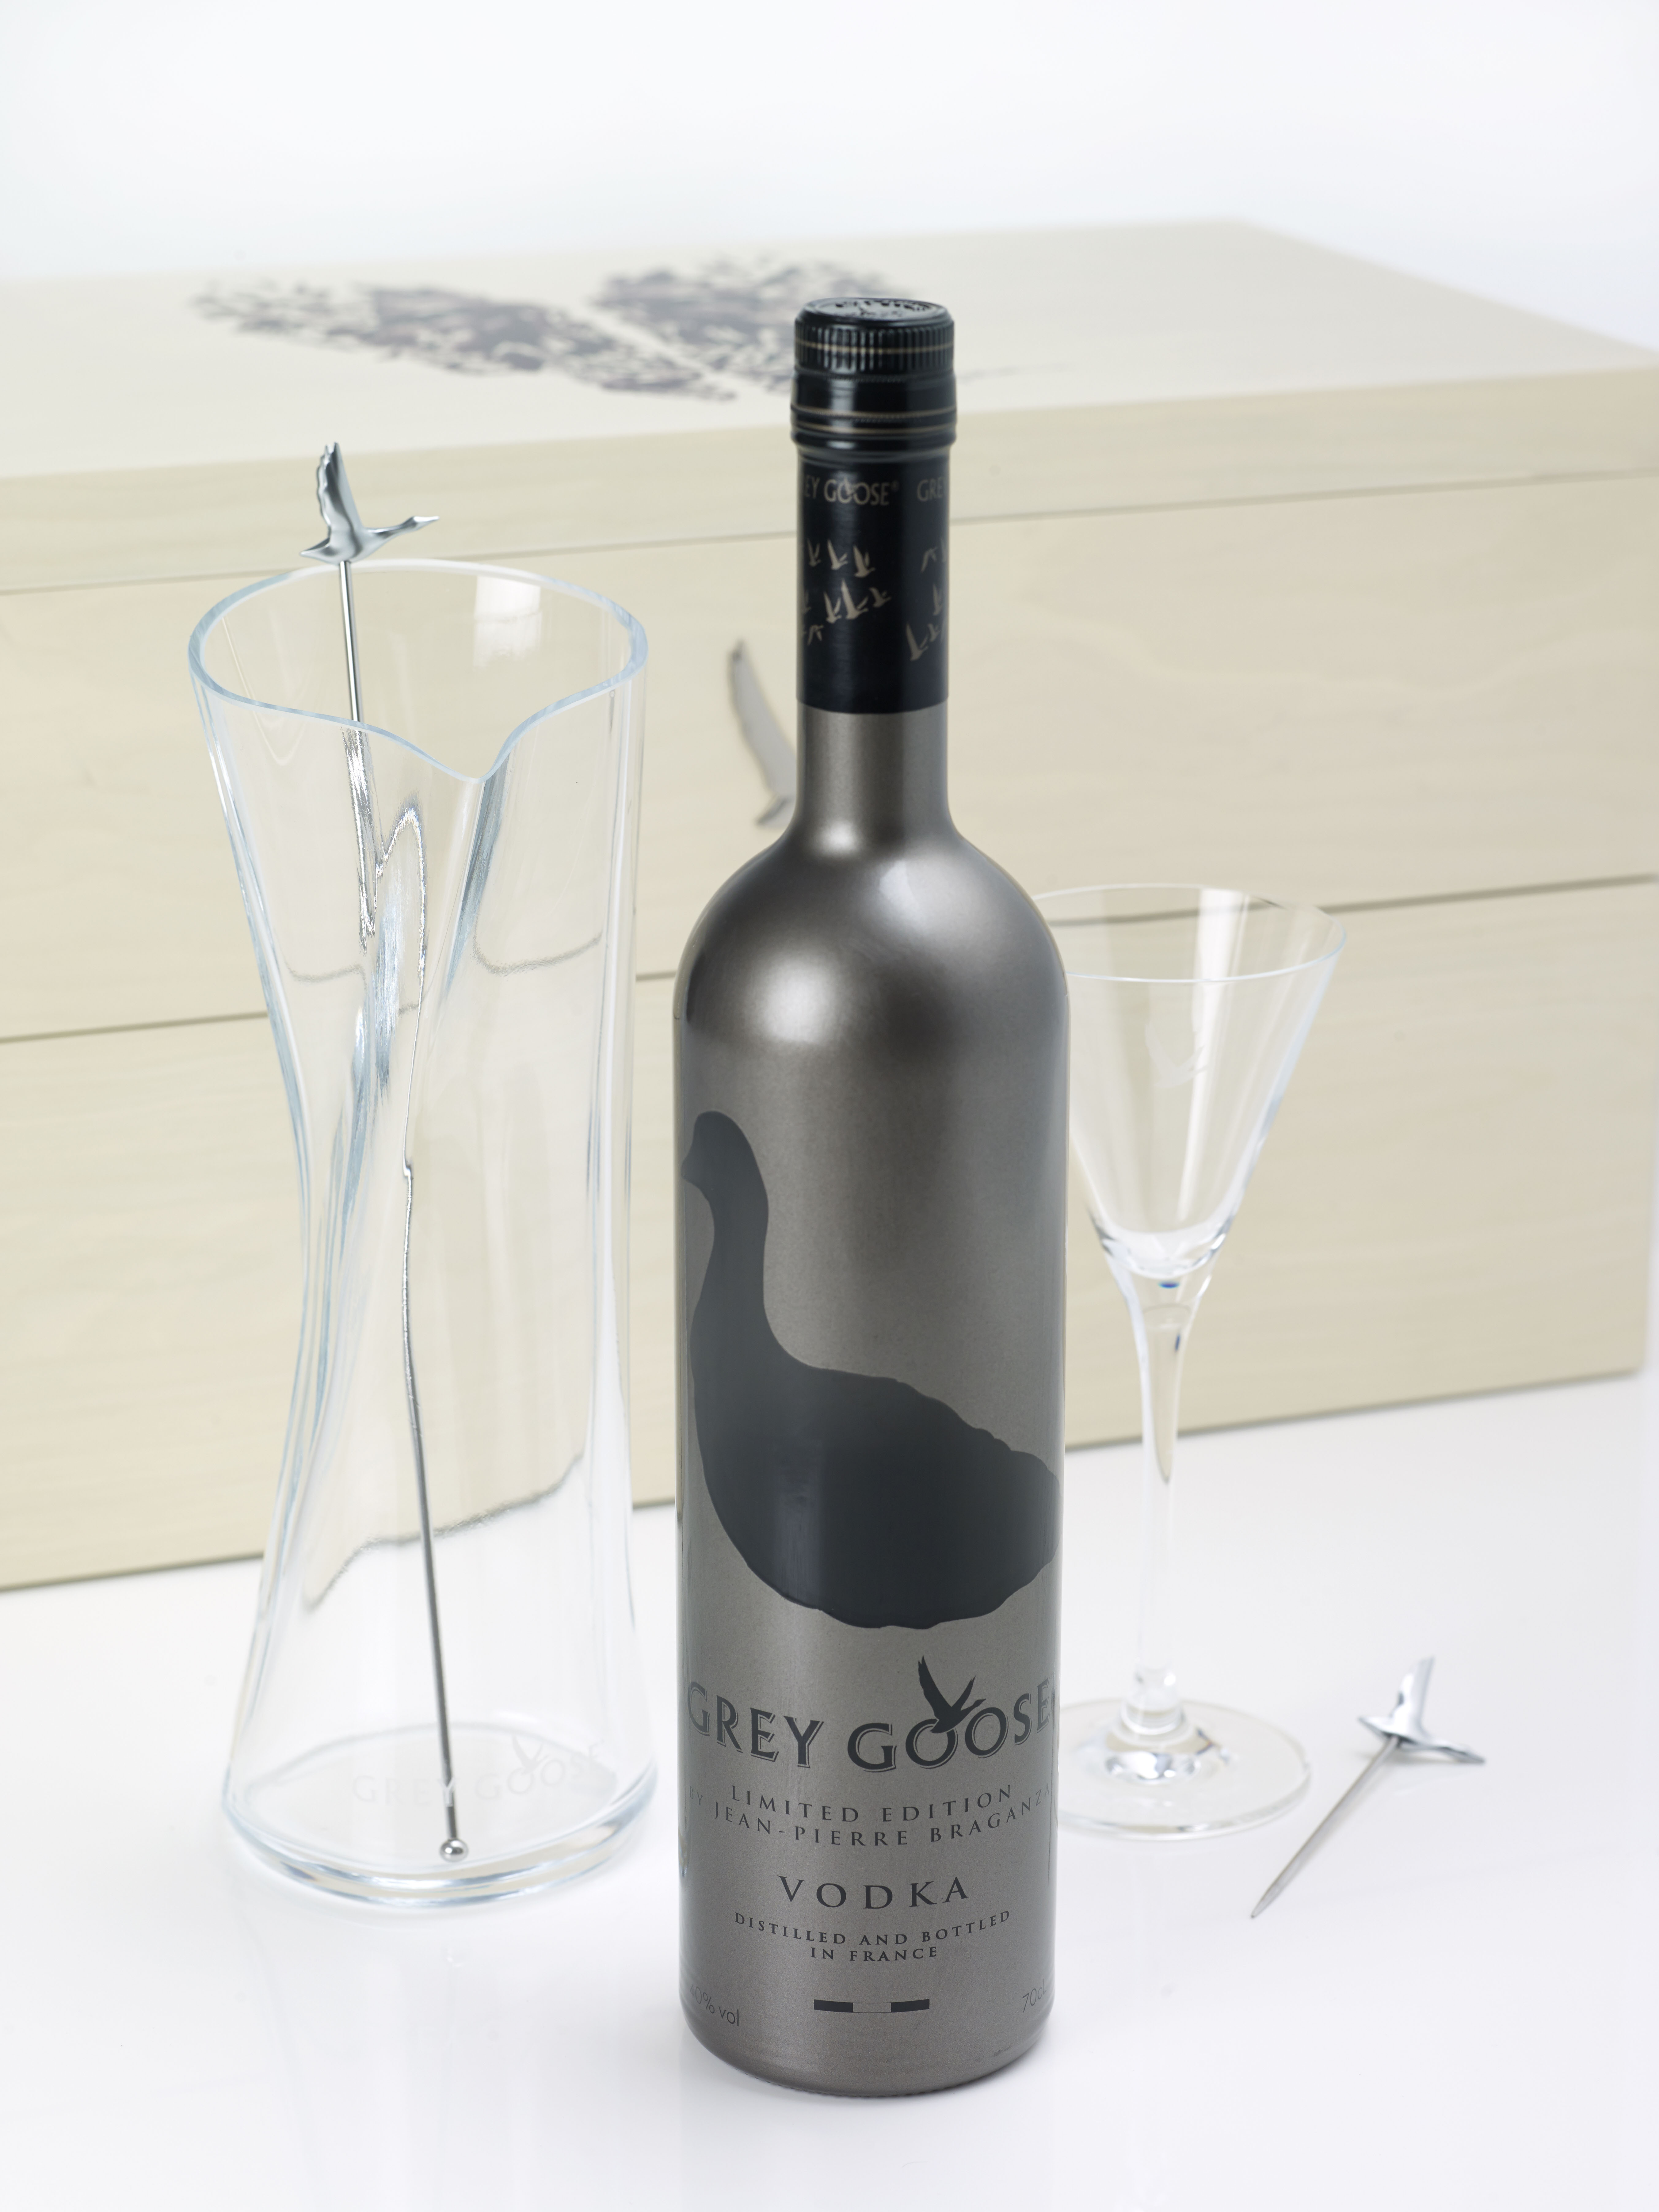 The Ultimate Grey Goose Martini Gift Set with design by JP Braganza